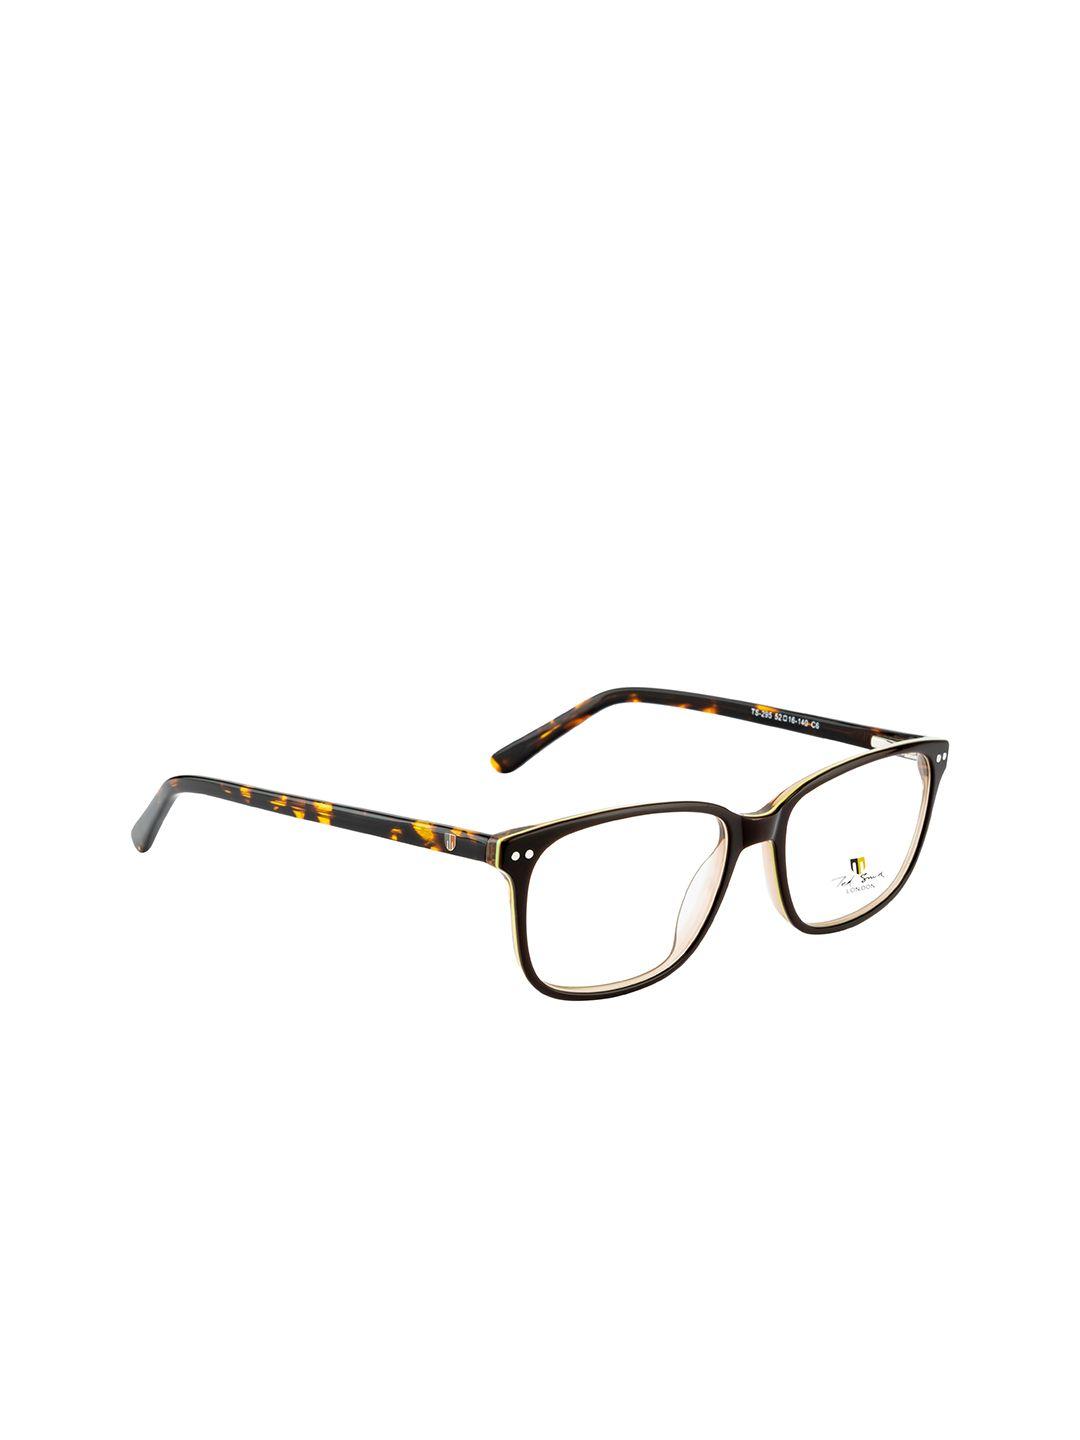 ted smith unisex brown & yellow abstract full rim wayfarer frames ts-340_c6